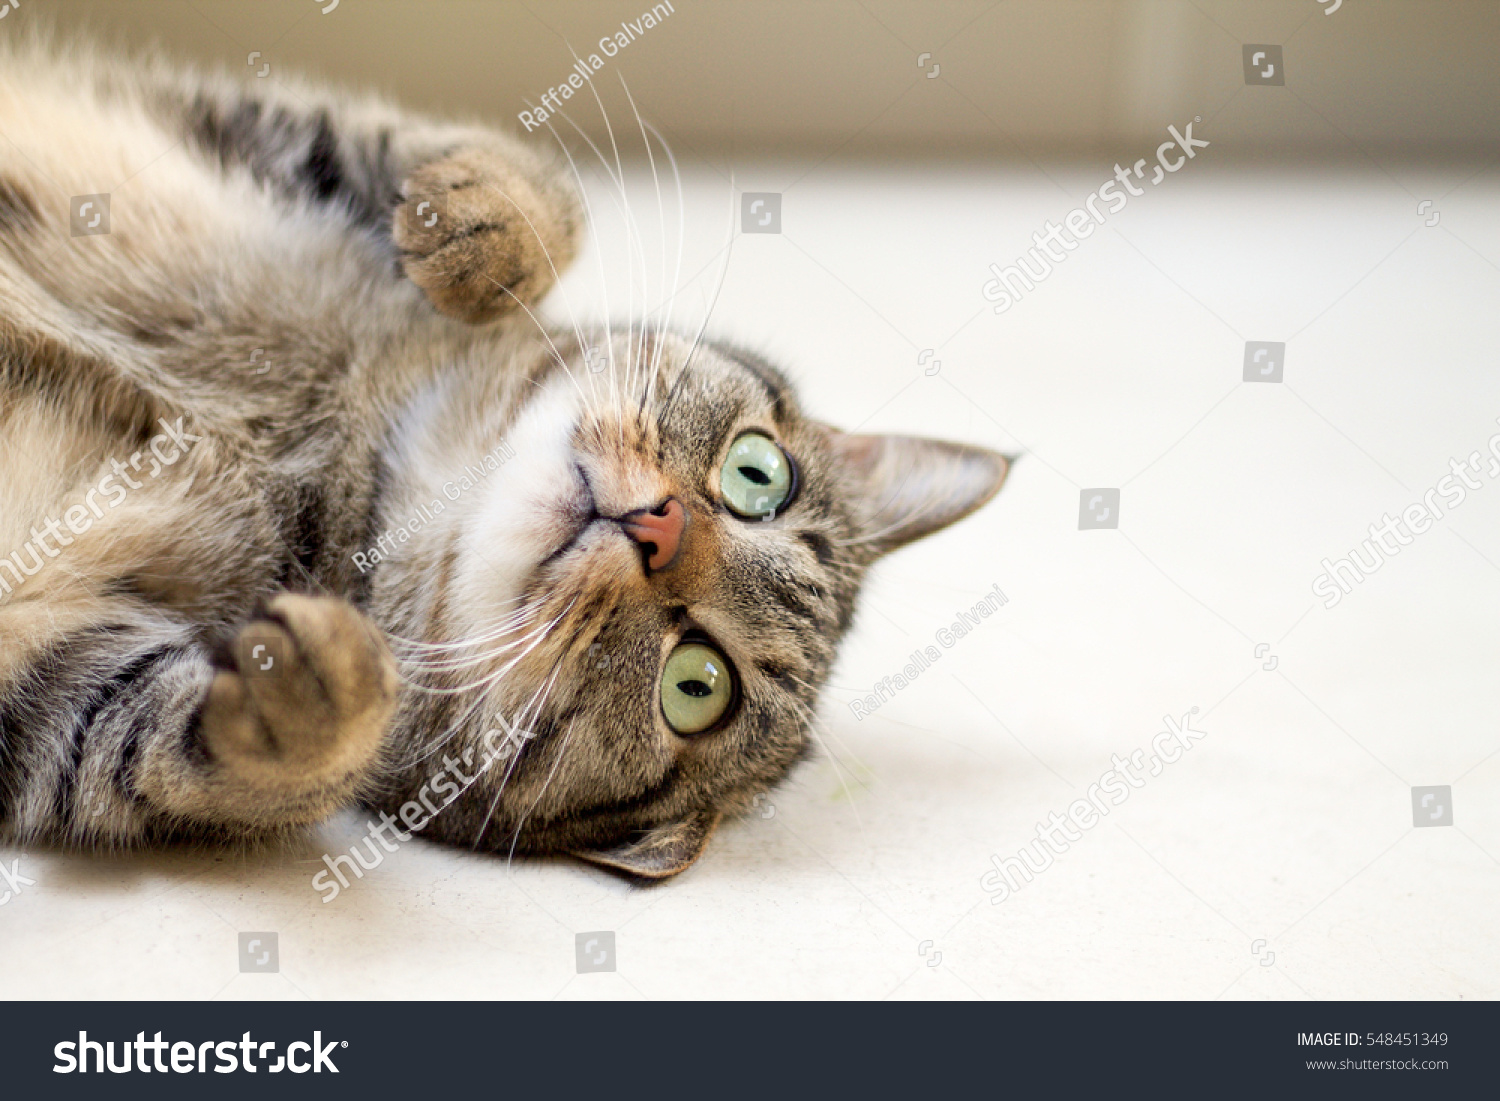 Nice cat playing lying on the ground #548451349